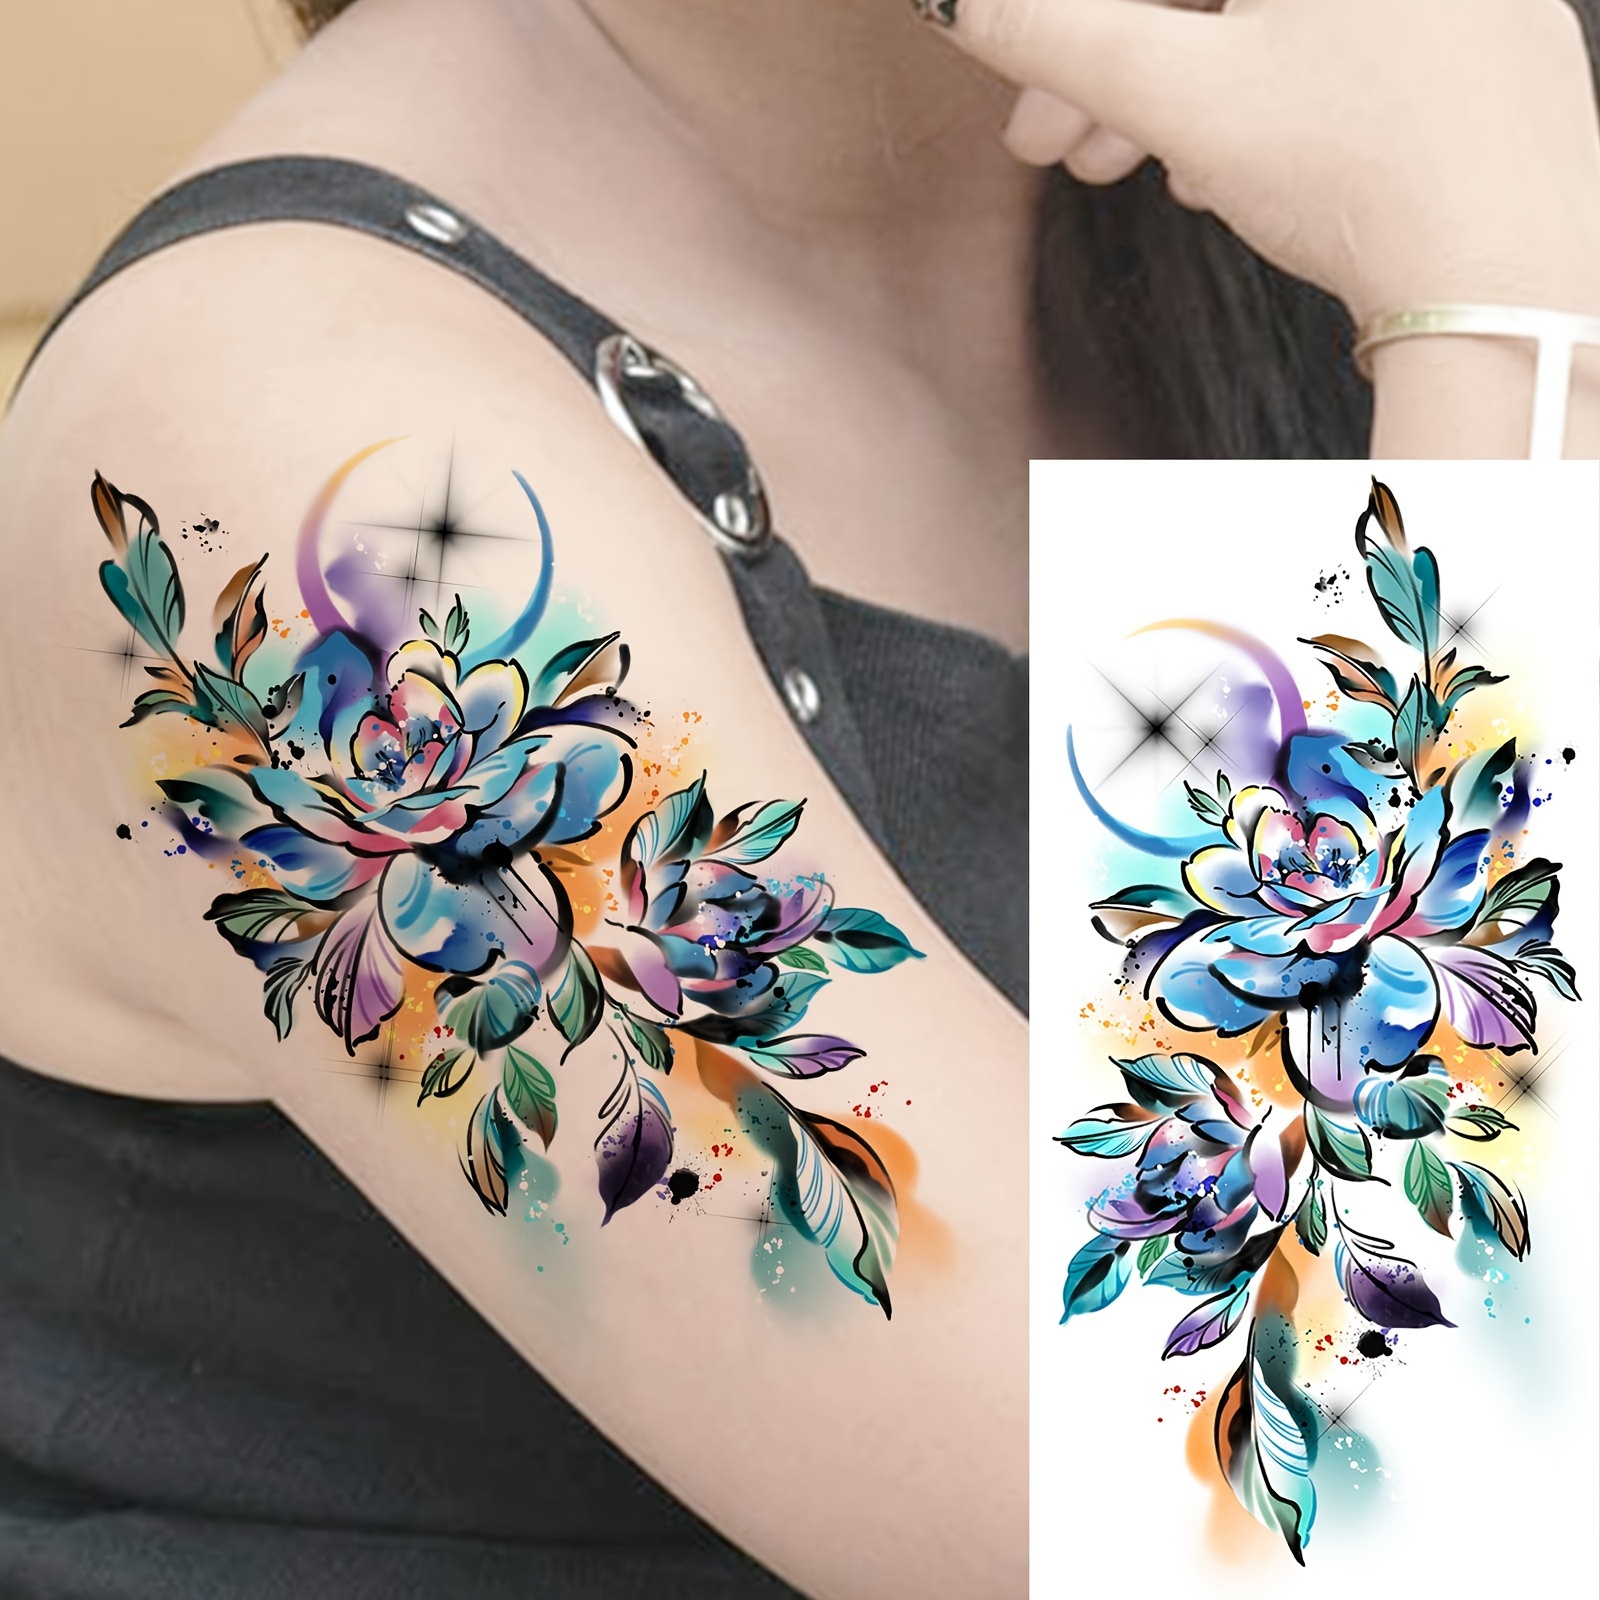 

Watercolor Peony Rose Temporary Tattoo Sticker For Women, 1 Sheet, Floral Fake Tattoo Sleeve For Adult Arm Forearm, Colorful Floral Temporary Body Art Tattoo With Application Instructions